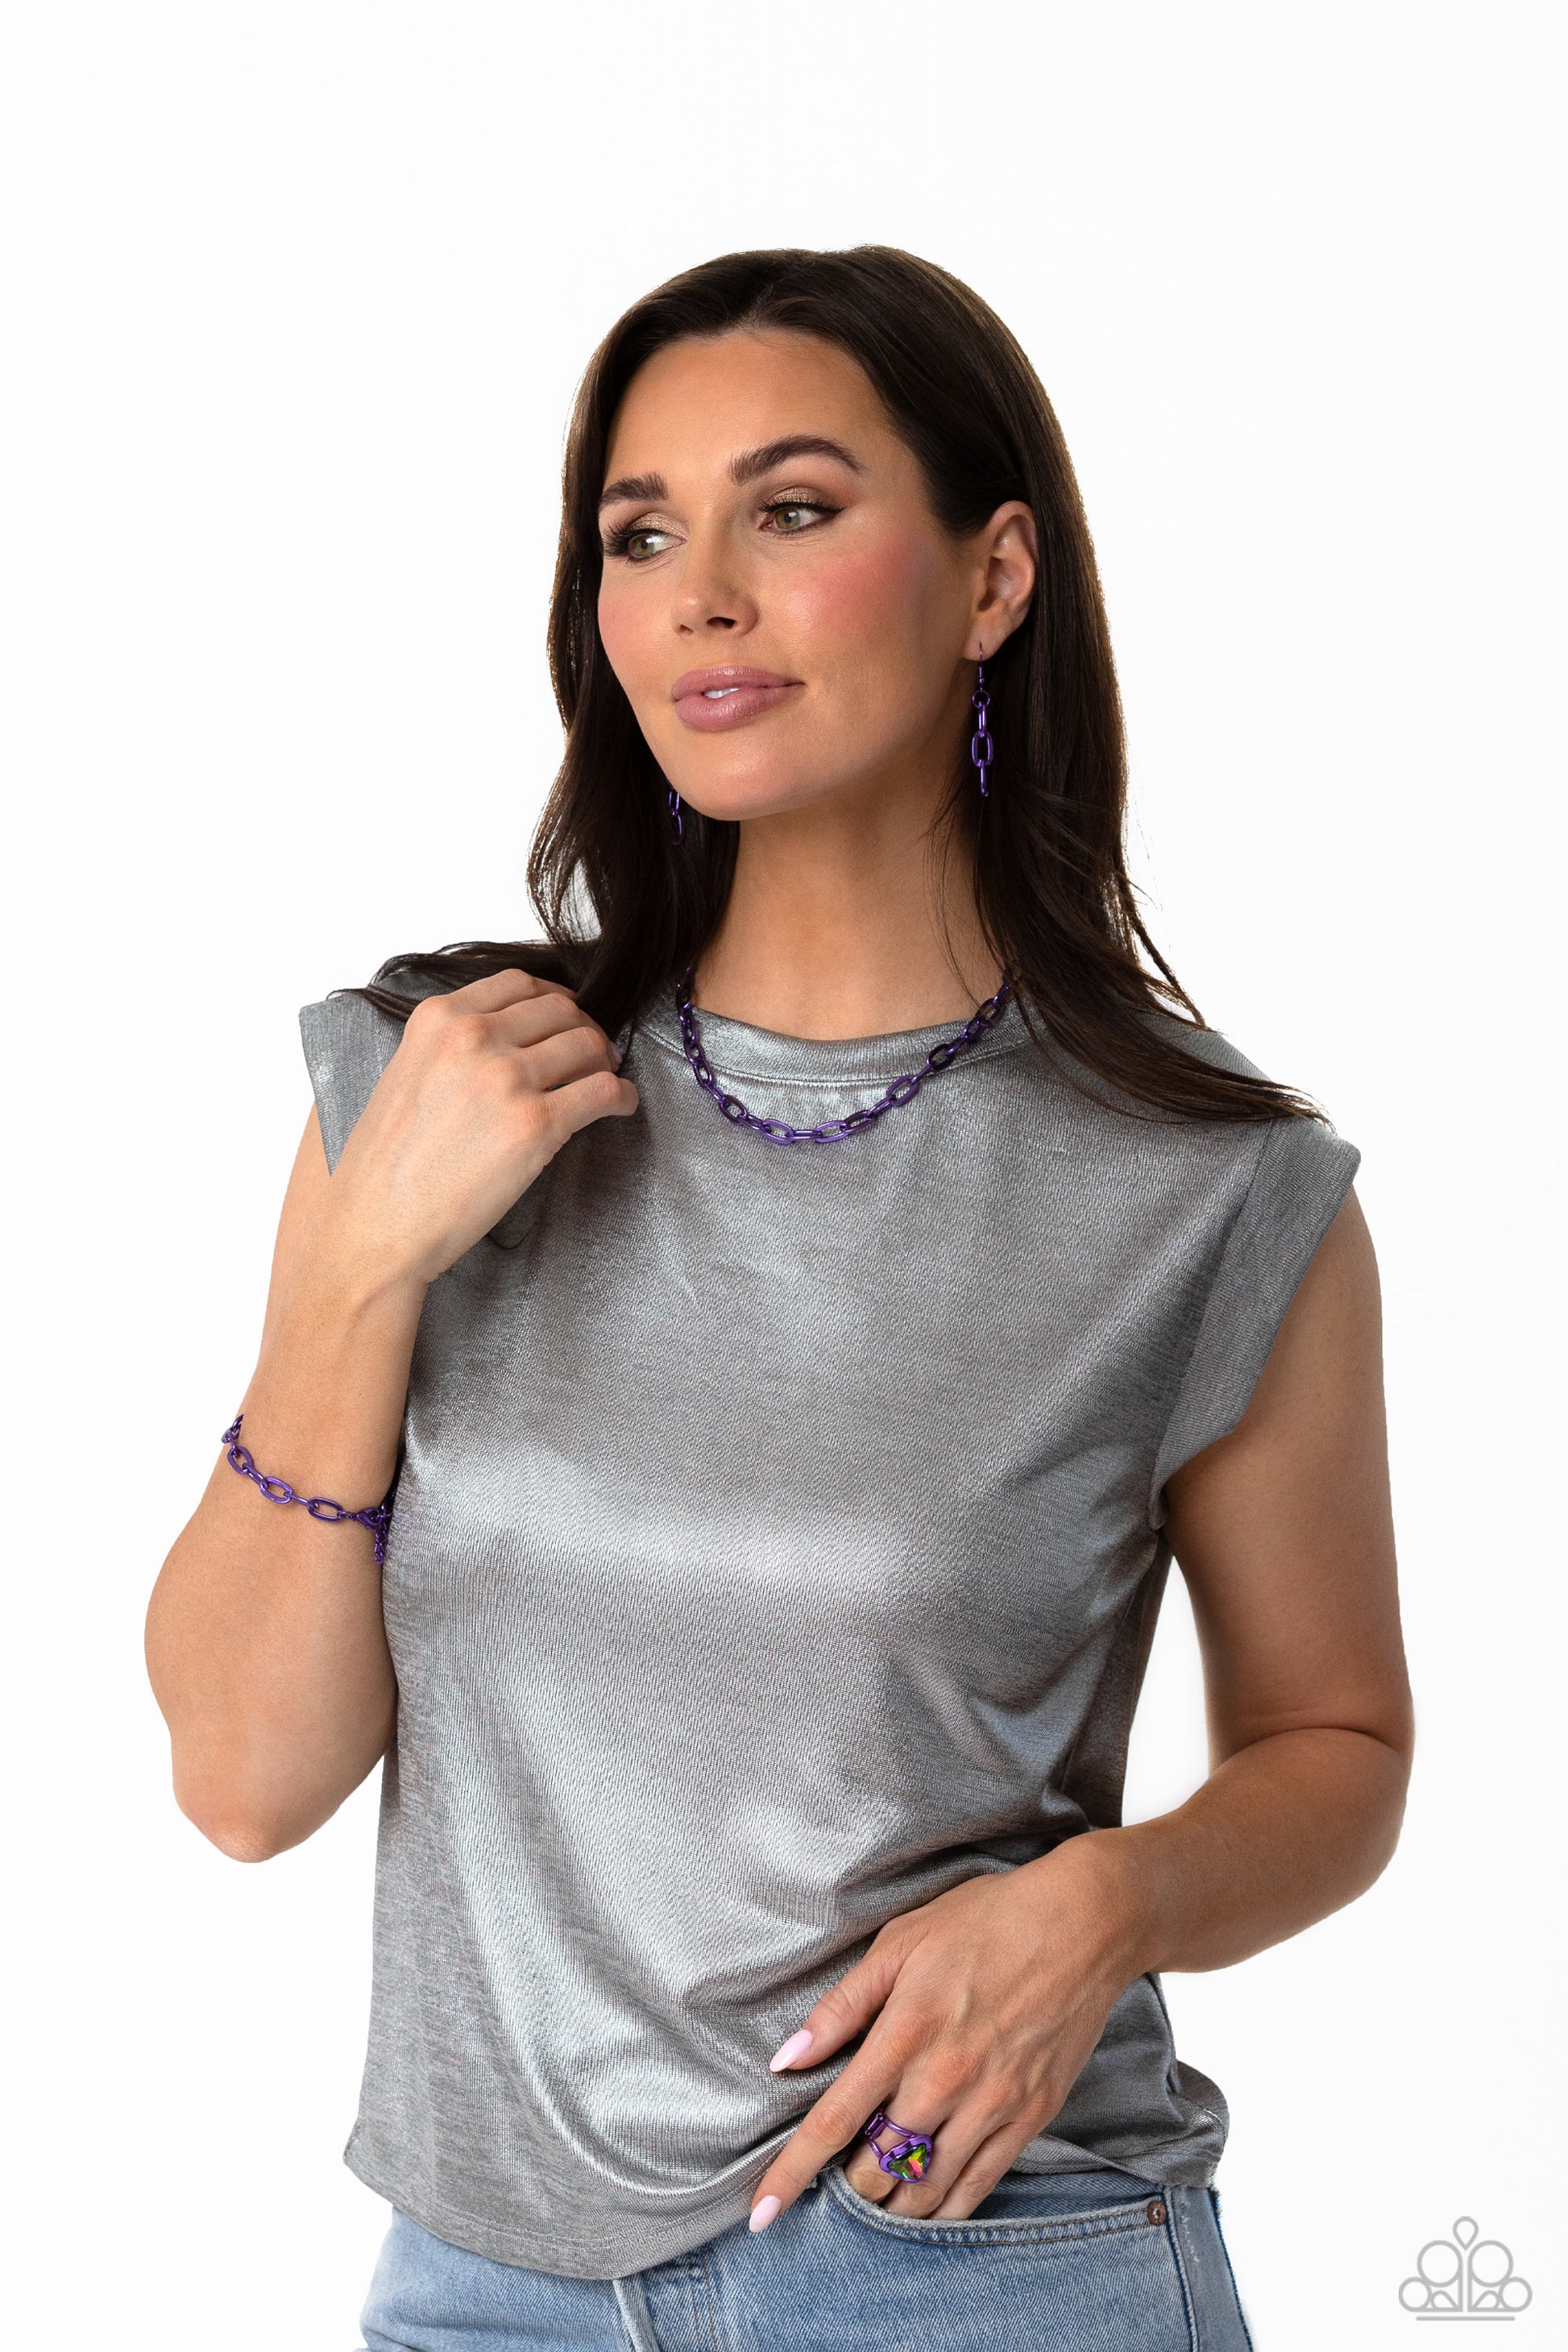 Paparazzi Accessories Triangle Tyrant - Purple Featuring a UV shimmer, a triangle-cut gem is pressed into a scalloped triangular electric purple frame set atop a thin, airy band for a colorfully gritty look. Features a stretchy band for a flexible fit. So